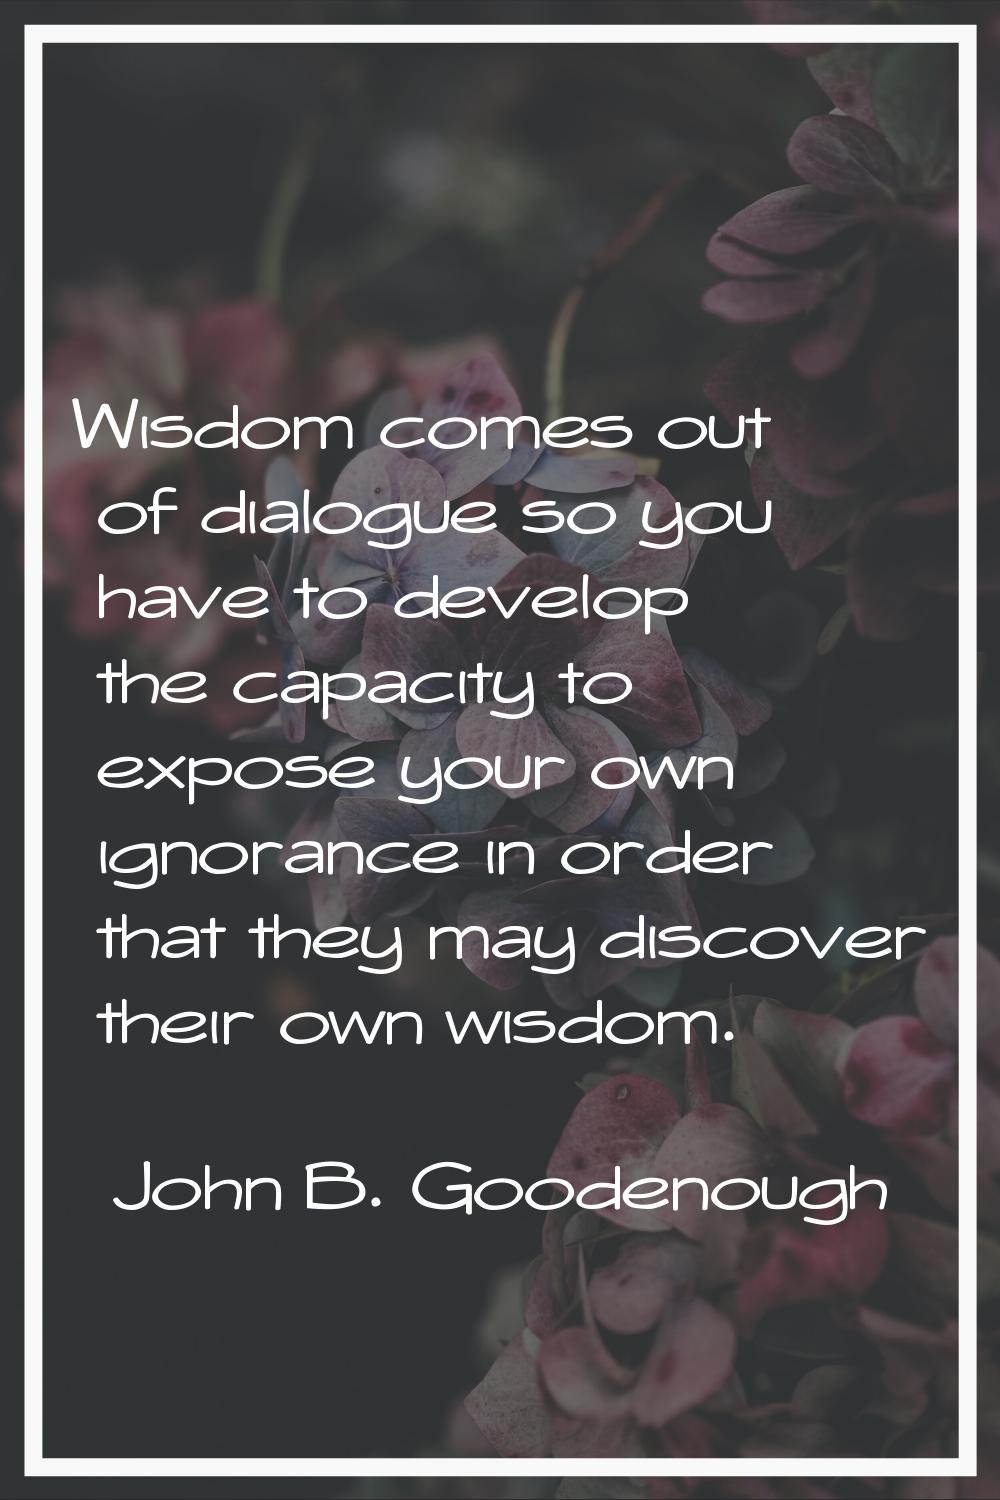 Wisdom comes out of dialogue so you have to develop the capacity to expose your own ignorance in or